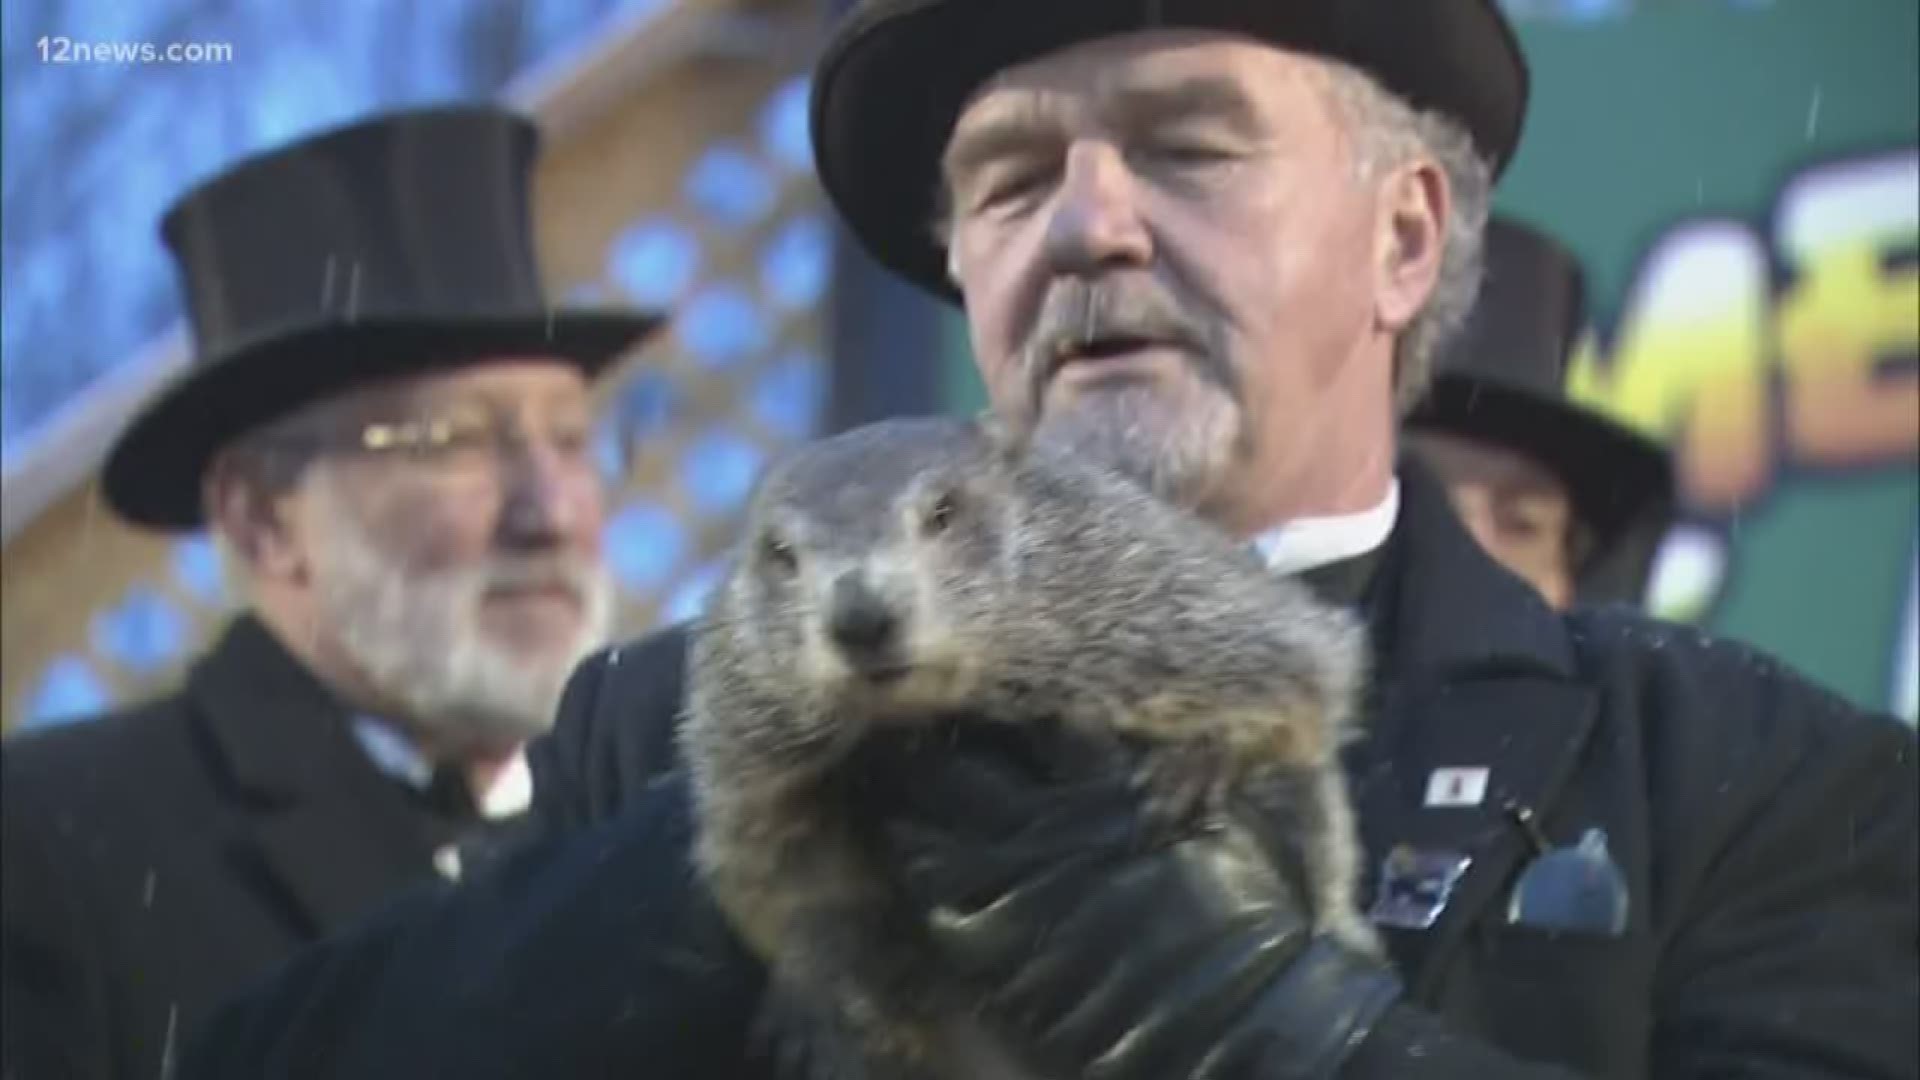 Looks like the famous groundhog didn't see his shadow this year, marking an early spring on the horizon.